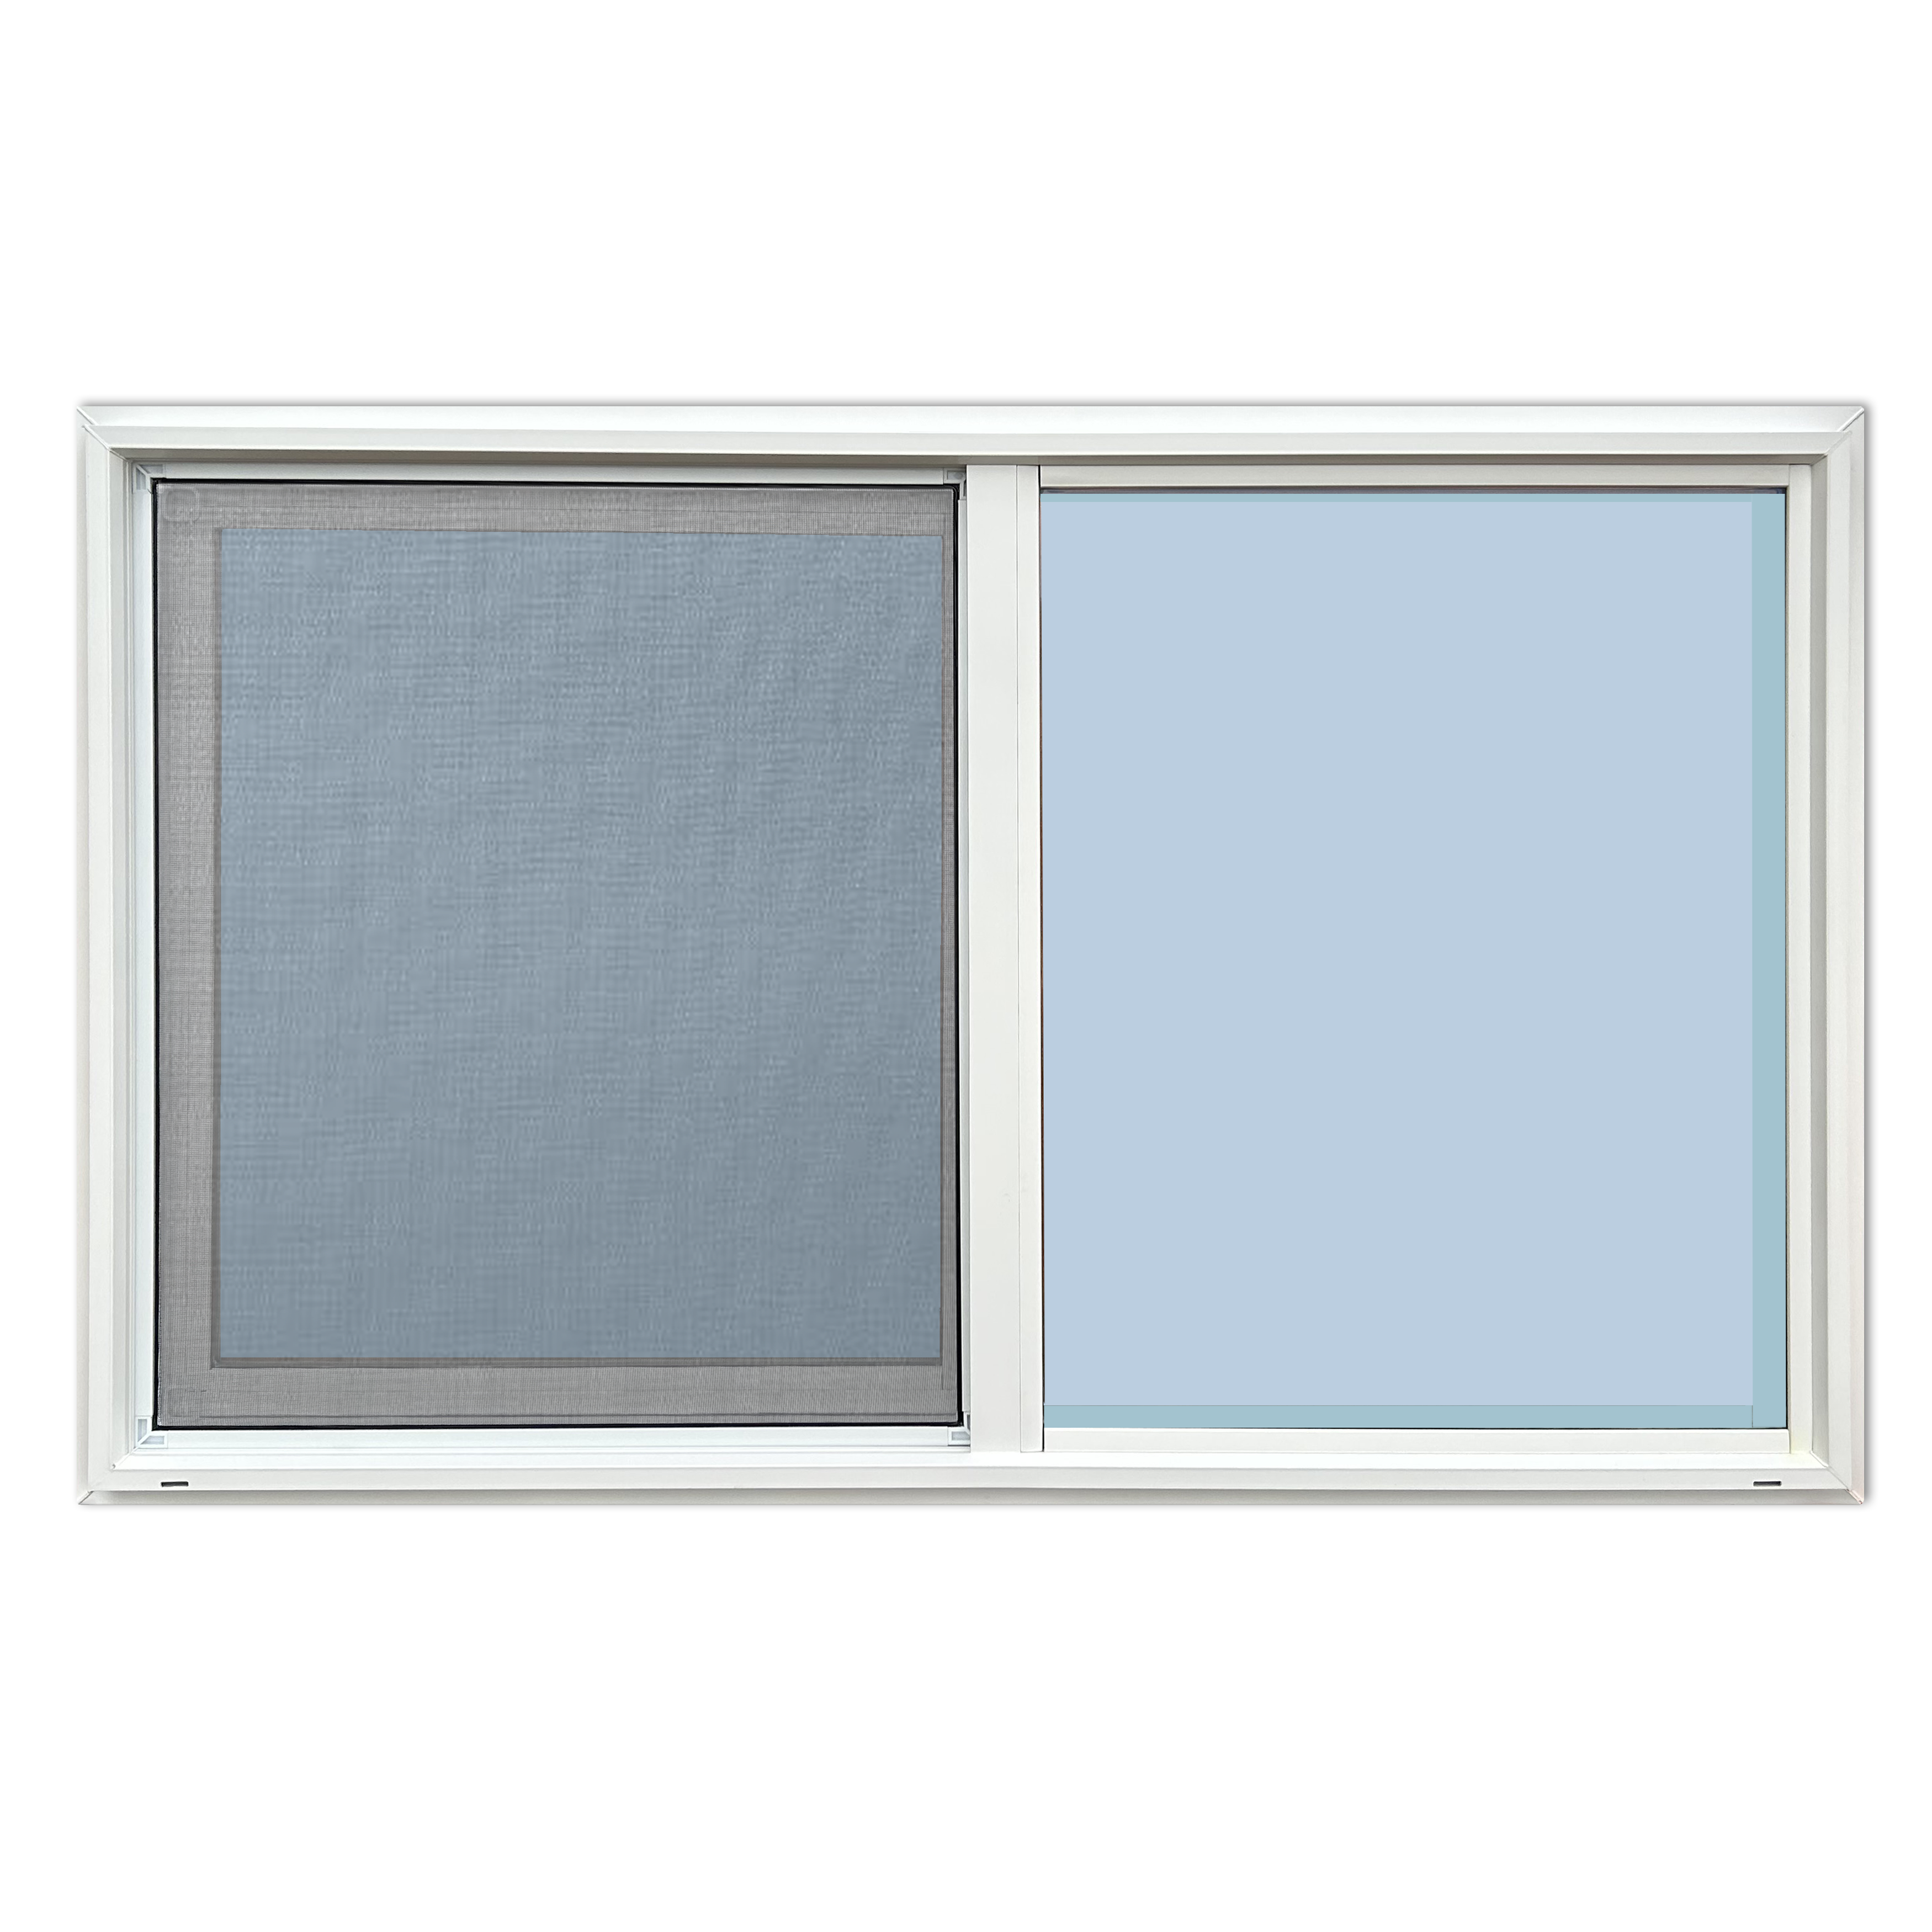 48" x 30" Vinyl Window For Shipping Container End Wall